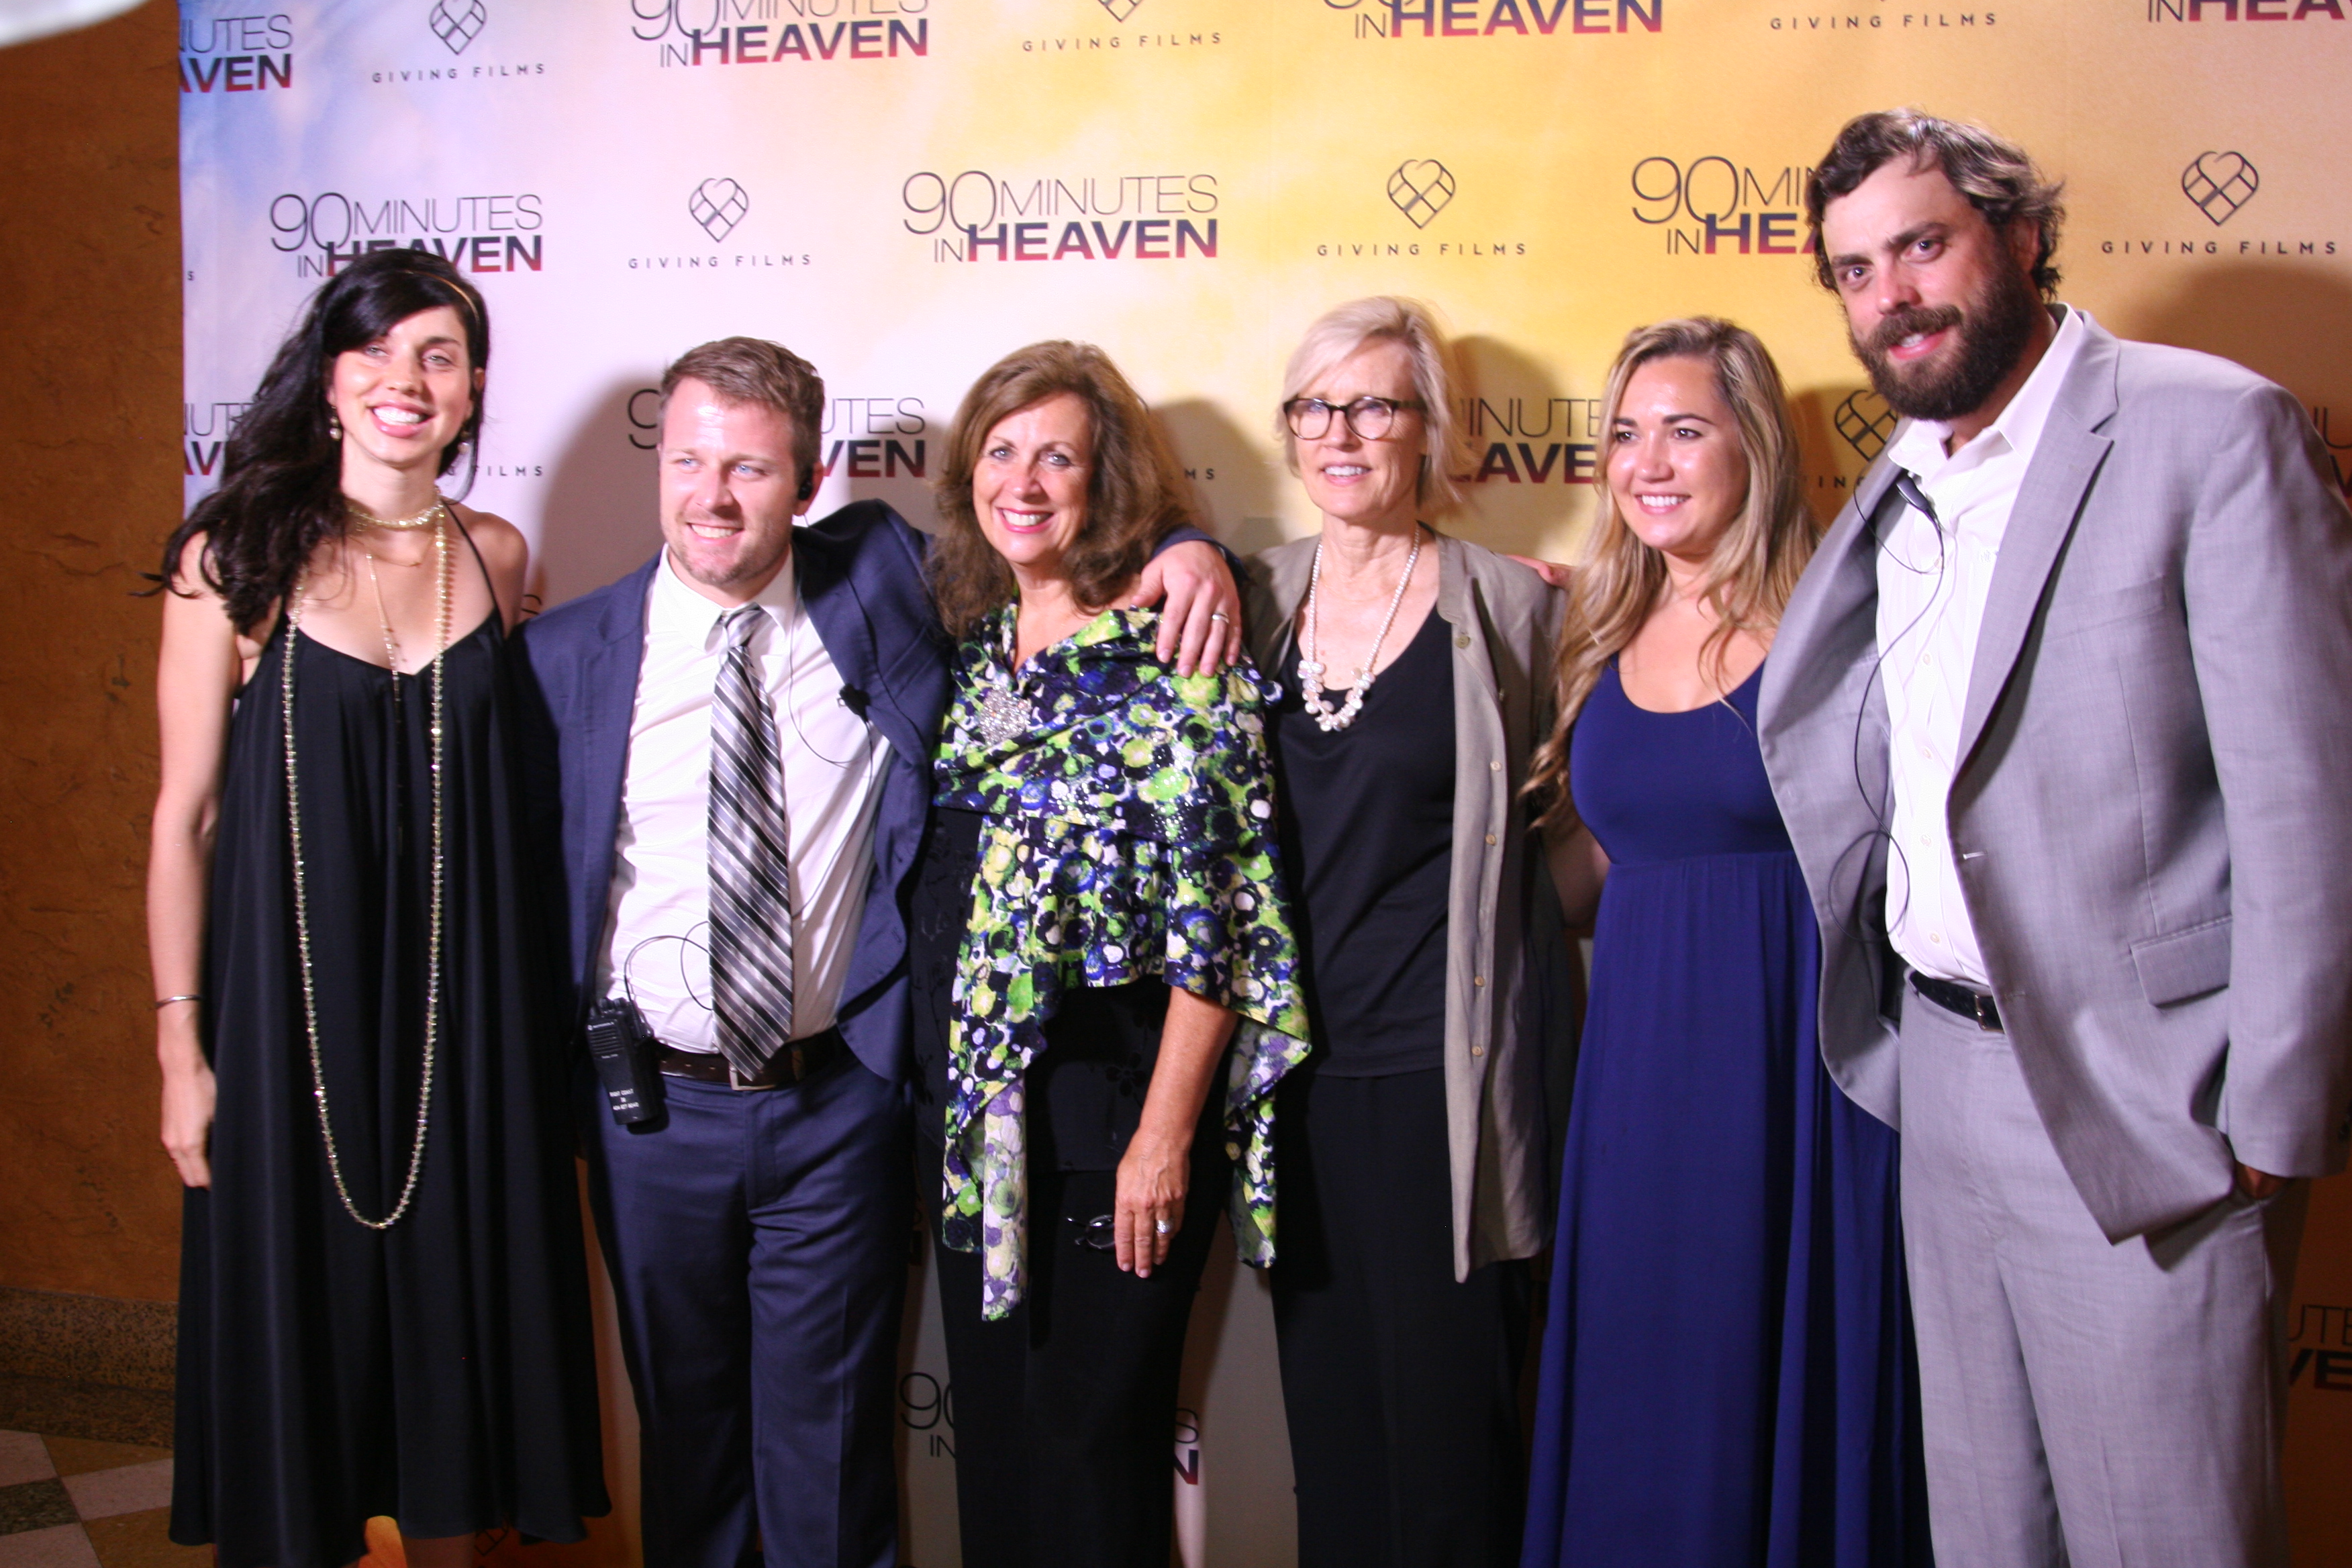 The Lovell-Fairchild Communications team on the red carpet at the Fox Theatre in Atlanta, Georgia for the 90 Minutes in Heaven premiere.